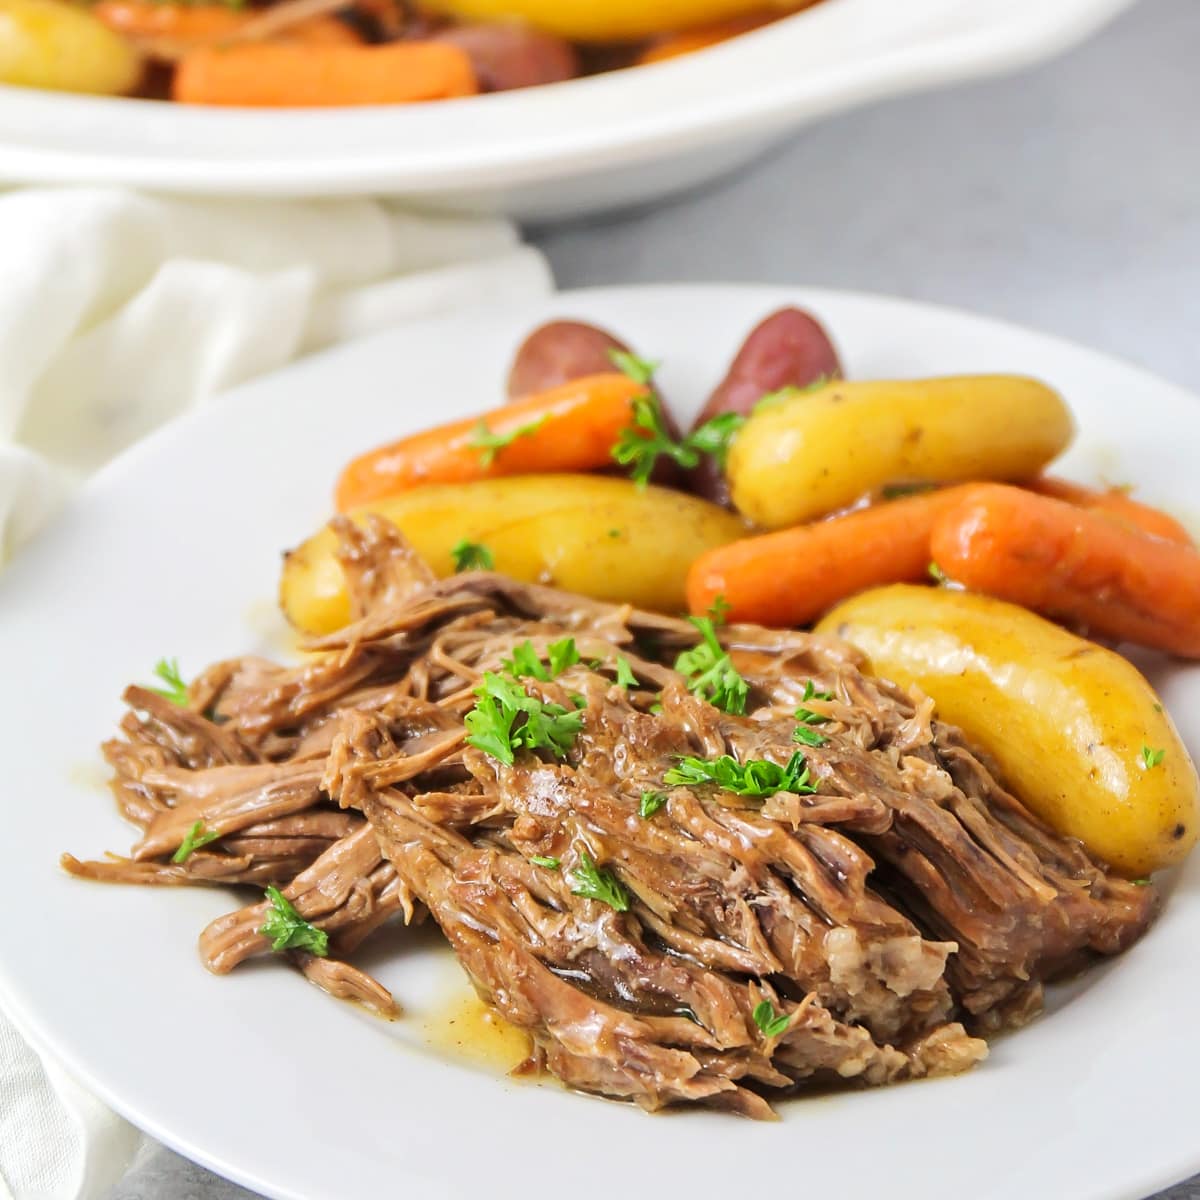 Instant pot pot roast served on a white plate with carrots and potatoes.